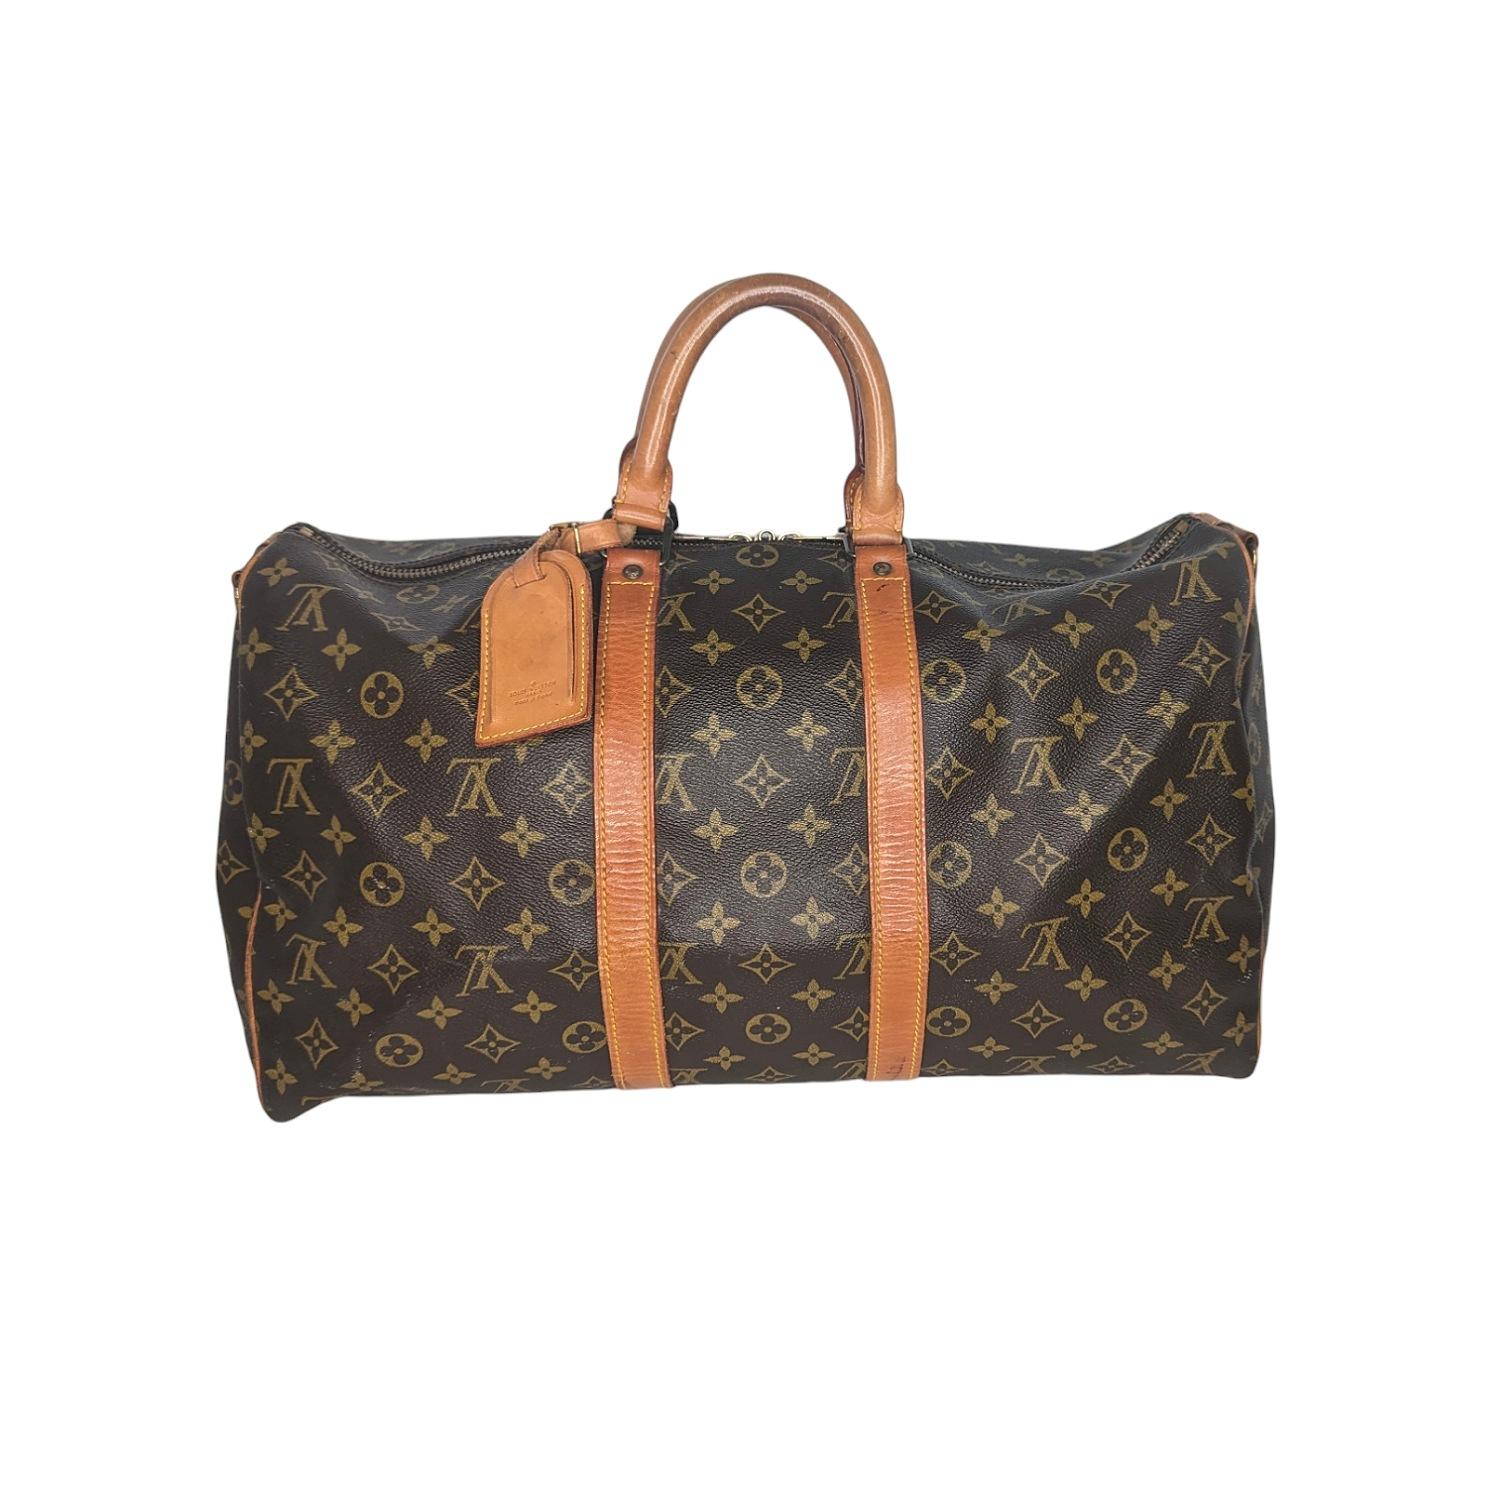 This stylish duffel is crafted of monogram coated canvas with vachetta leather wrap around detailing and rolled top handles with brass hardware. The top zippers open to a cocoa brown fabric interior. Est. Retail $1,420

Designer: Louis